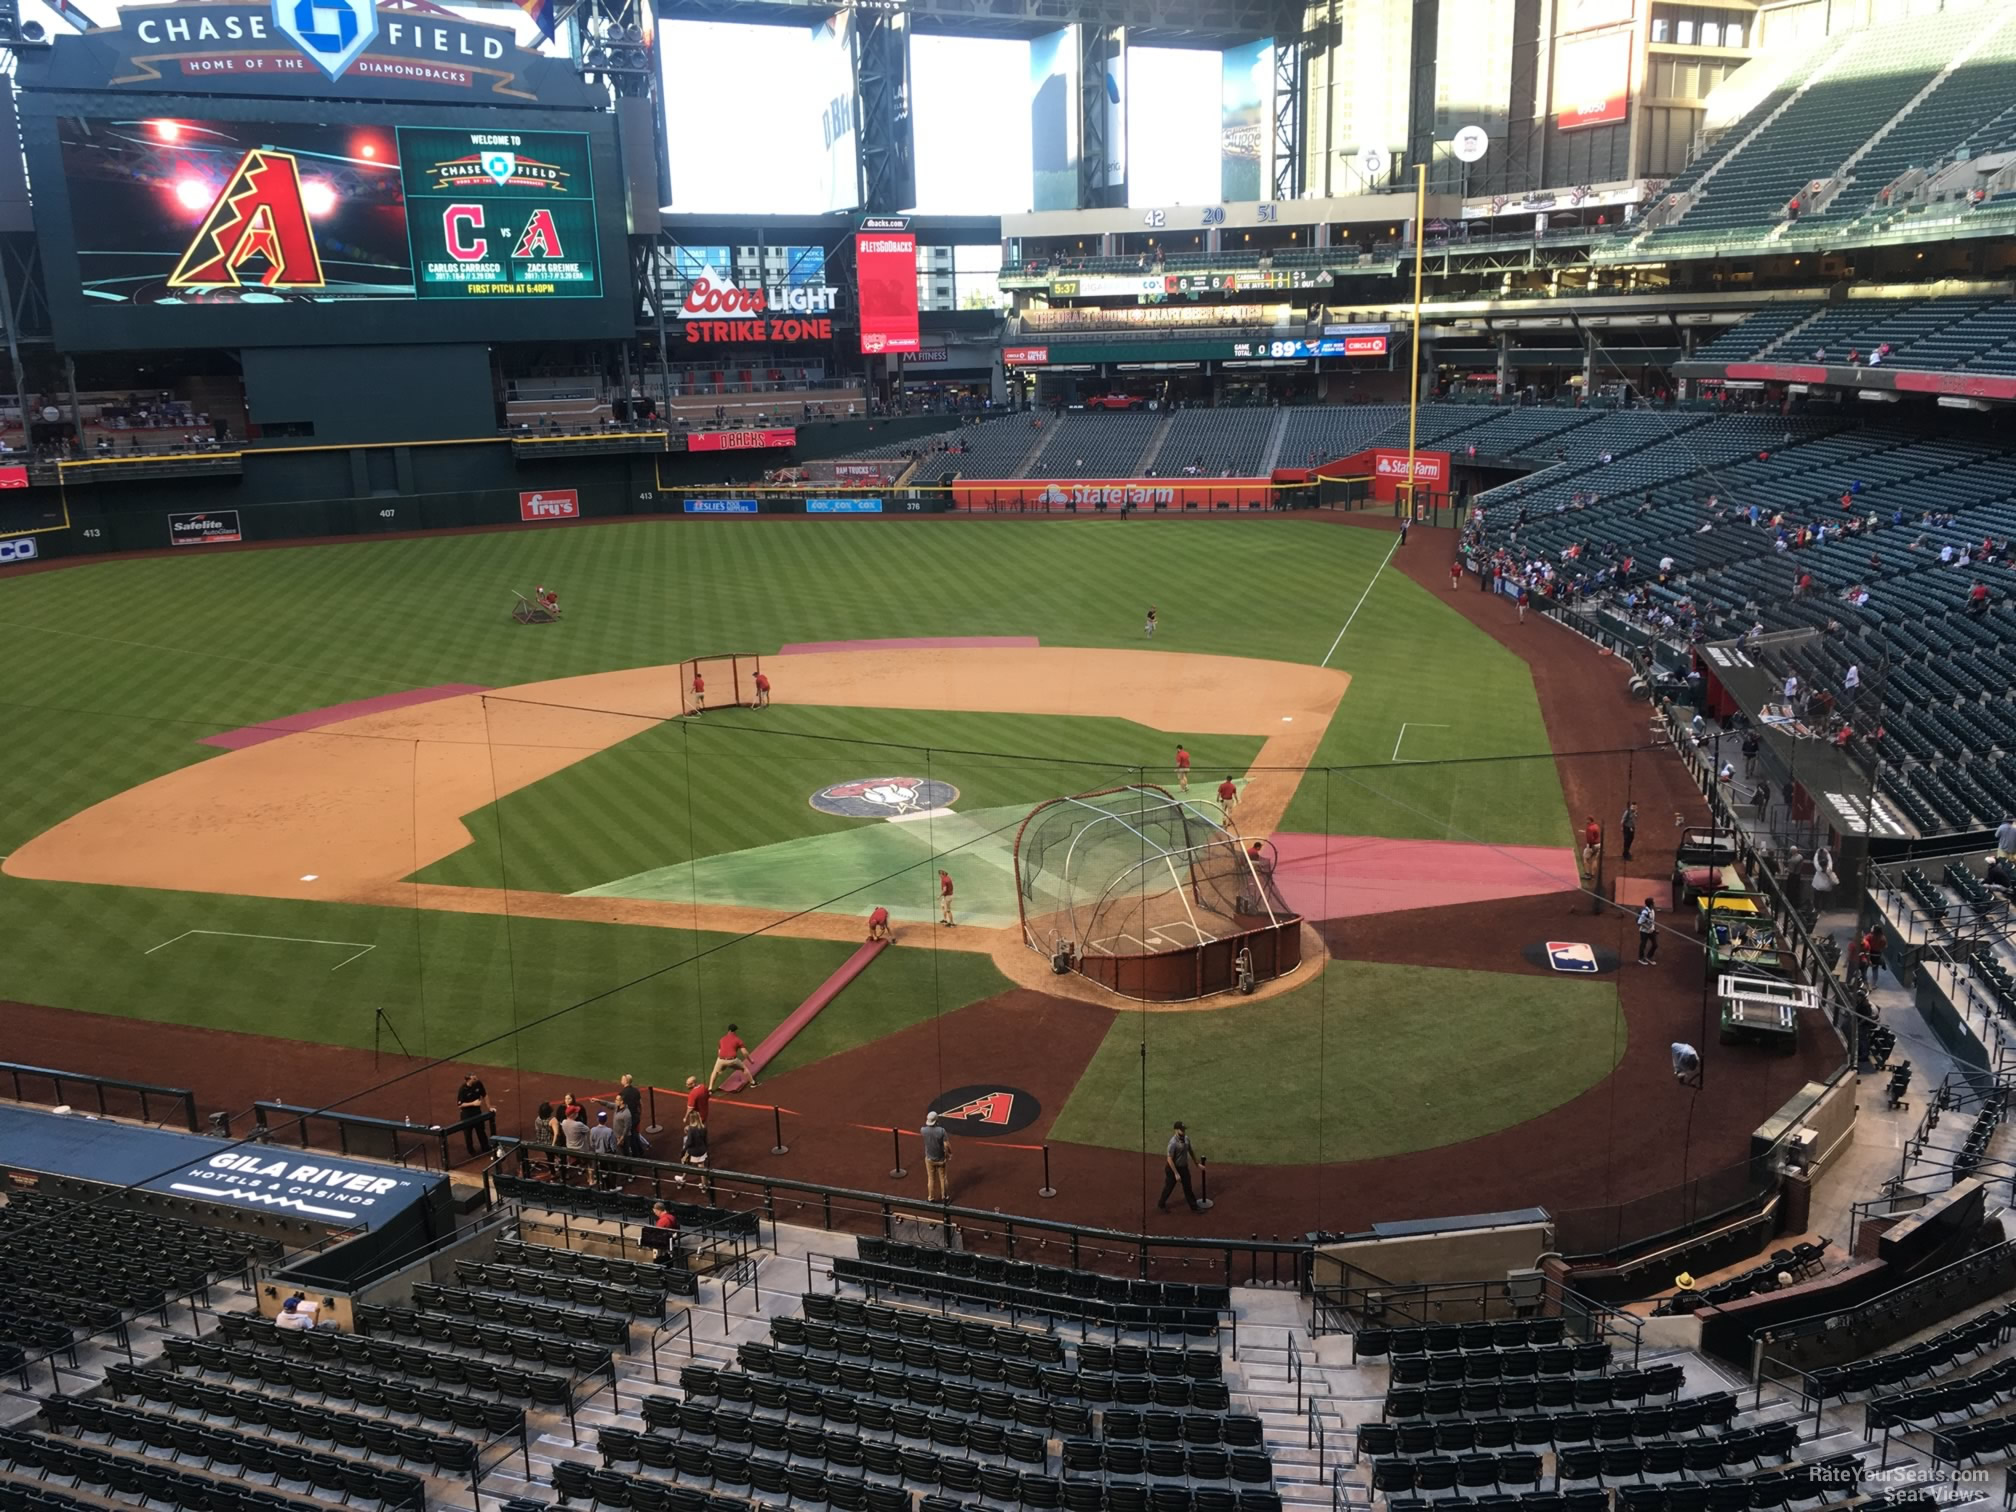 section 210h, row 1 seat view  for baseball - chase field